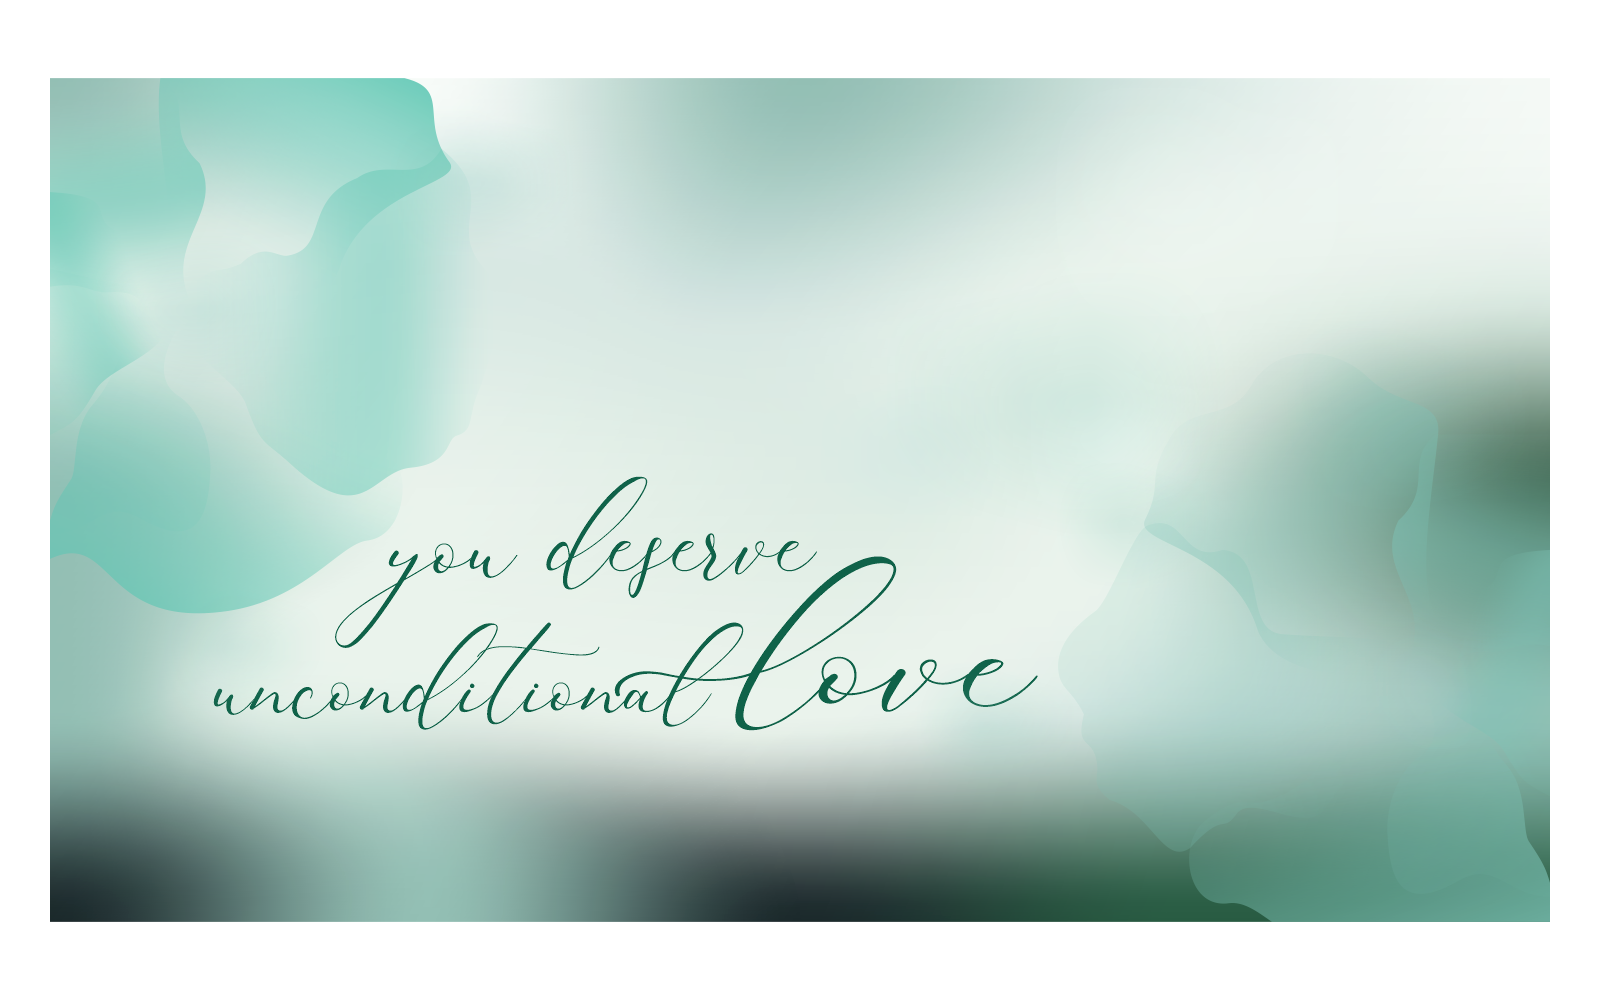 Inspirational Background Image 14400x8100px With Message About Unconditional Love